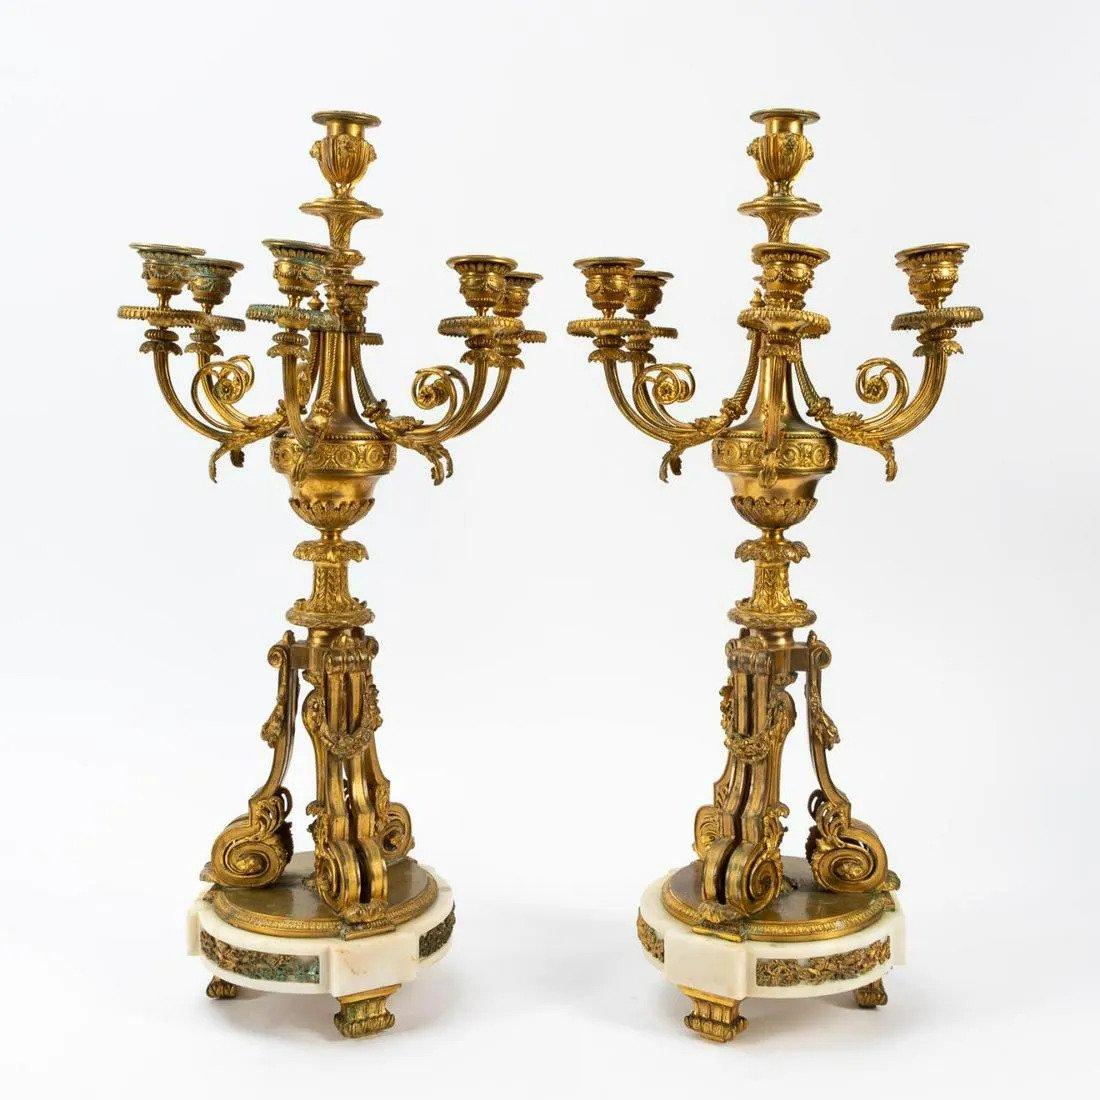 Continental pair of substantial bronze mounted green marble urn-form lamps in the Louis XVI taste, on socle plinths with square bases and pleated shades. Measures: Height. 33.25